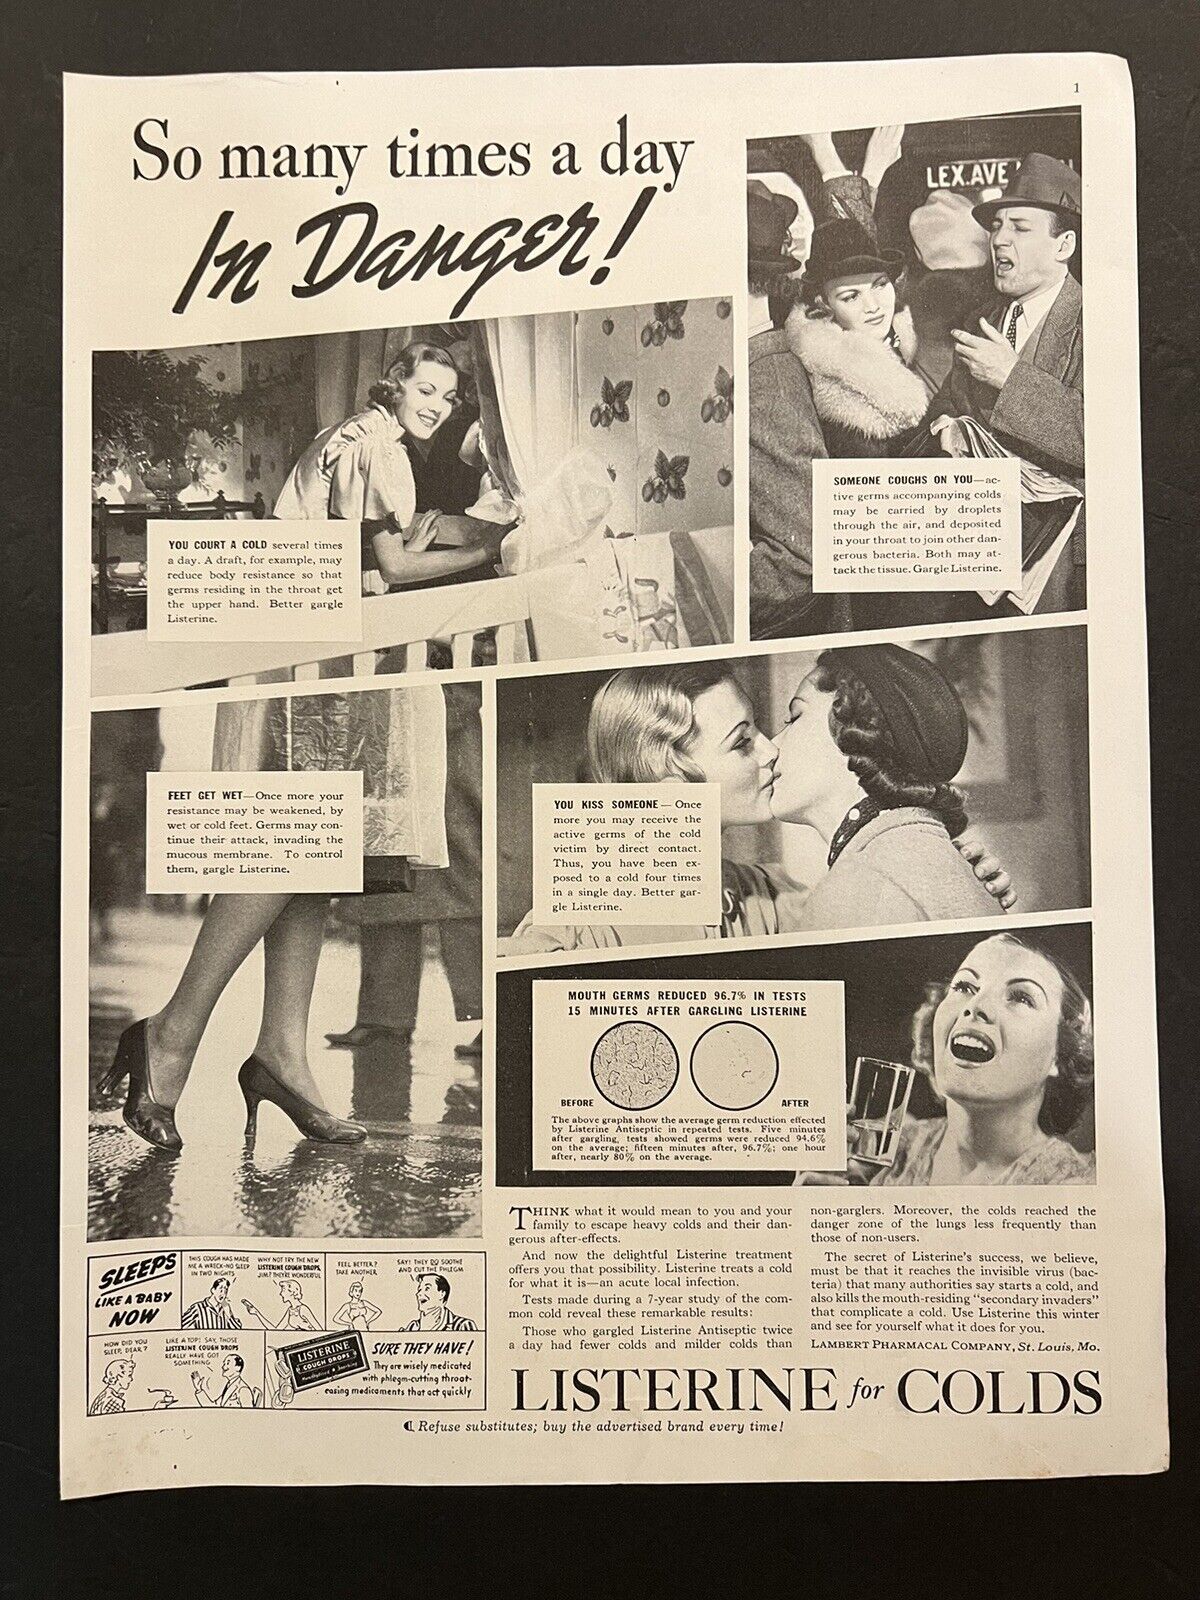 Vtg 1930s LIsterine Cough Drops for Colds AD